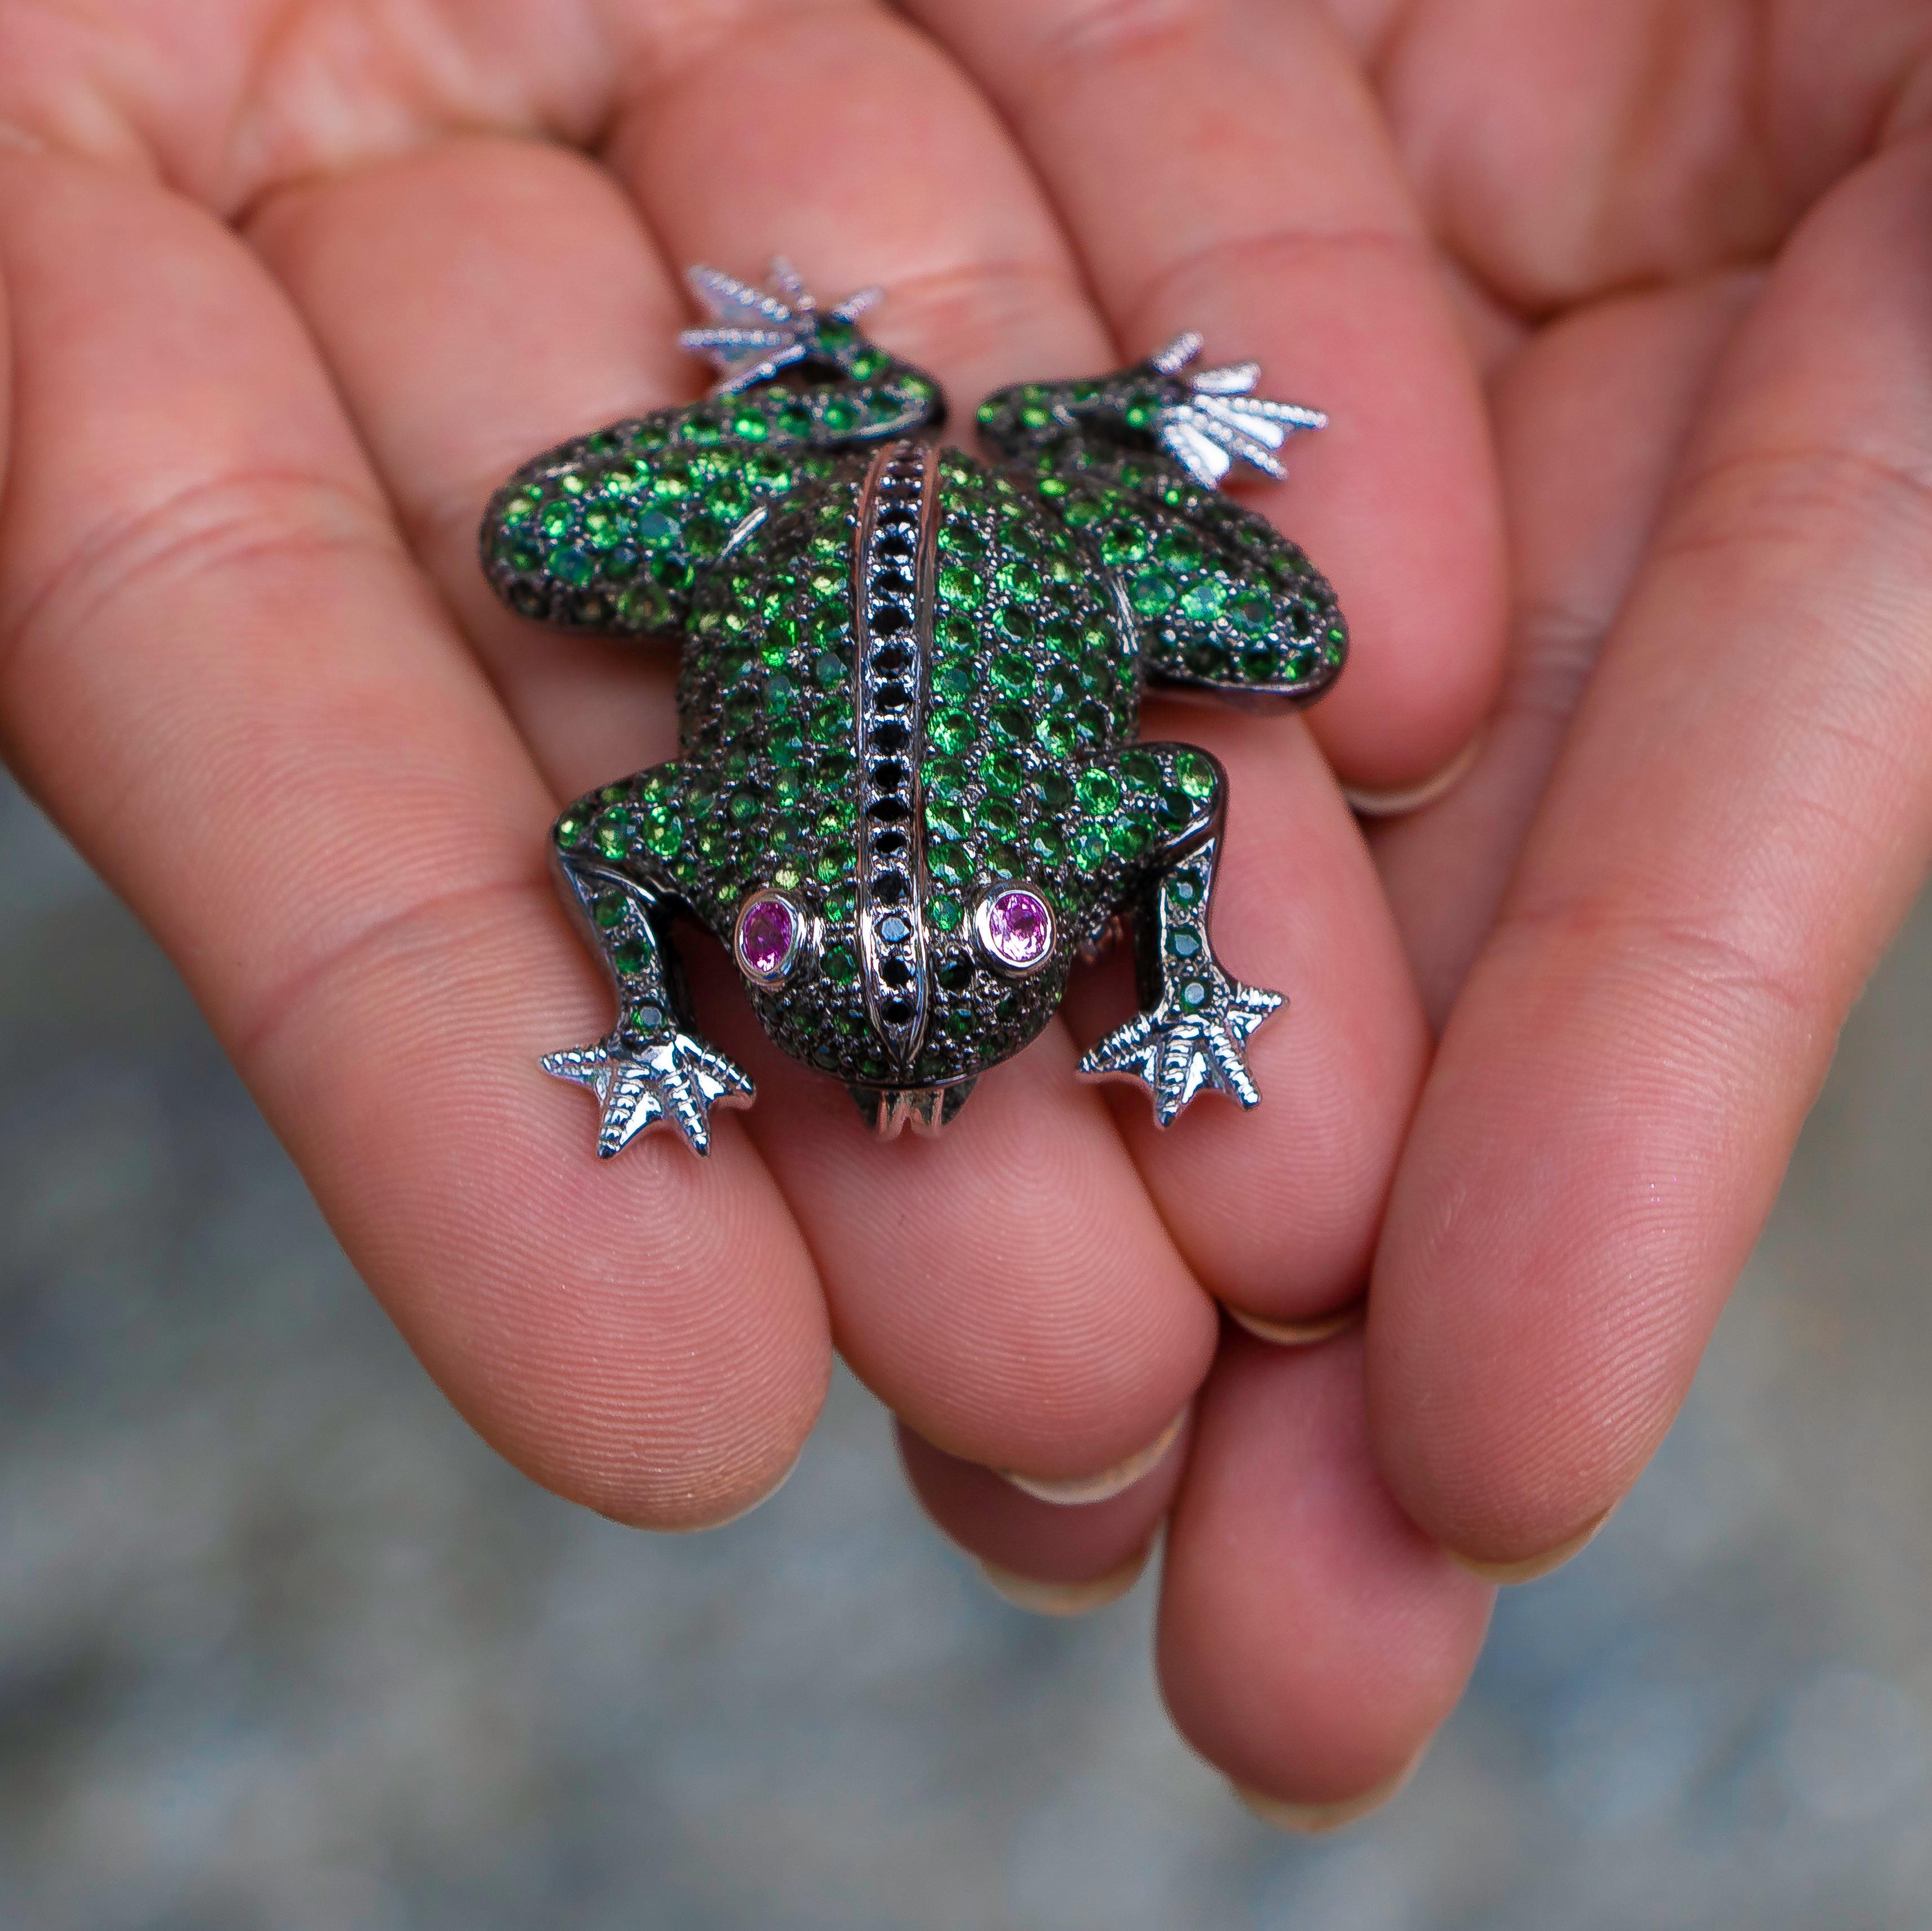 Adorable little green frog brooch with pink sapphire eyes, and a black diamond strip on its back. This brooch is different from any other brooch that I've ever come across, and it will always be a perfect addition to your outfit either as a brooch